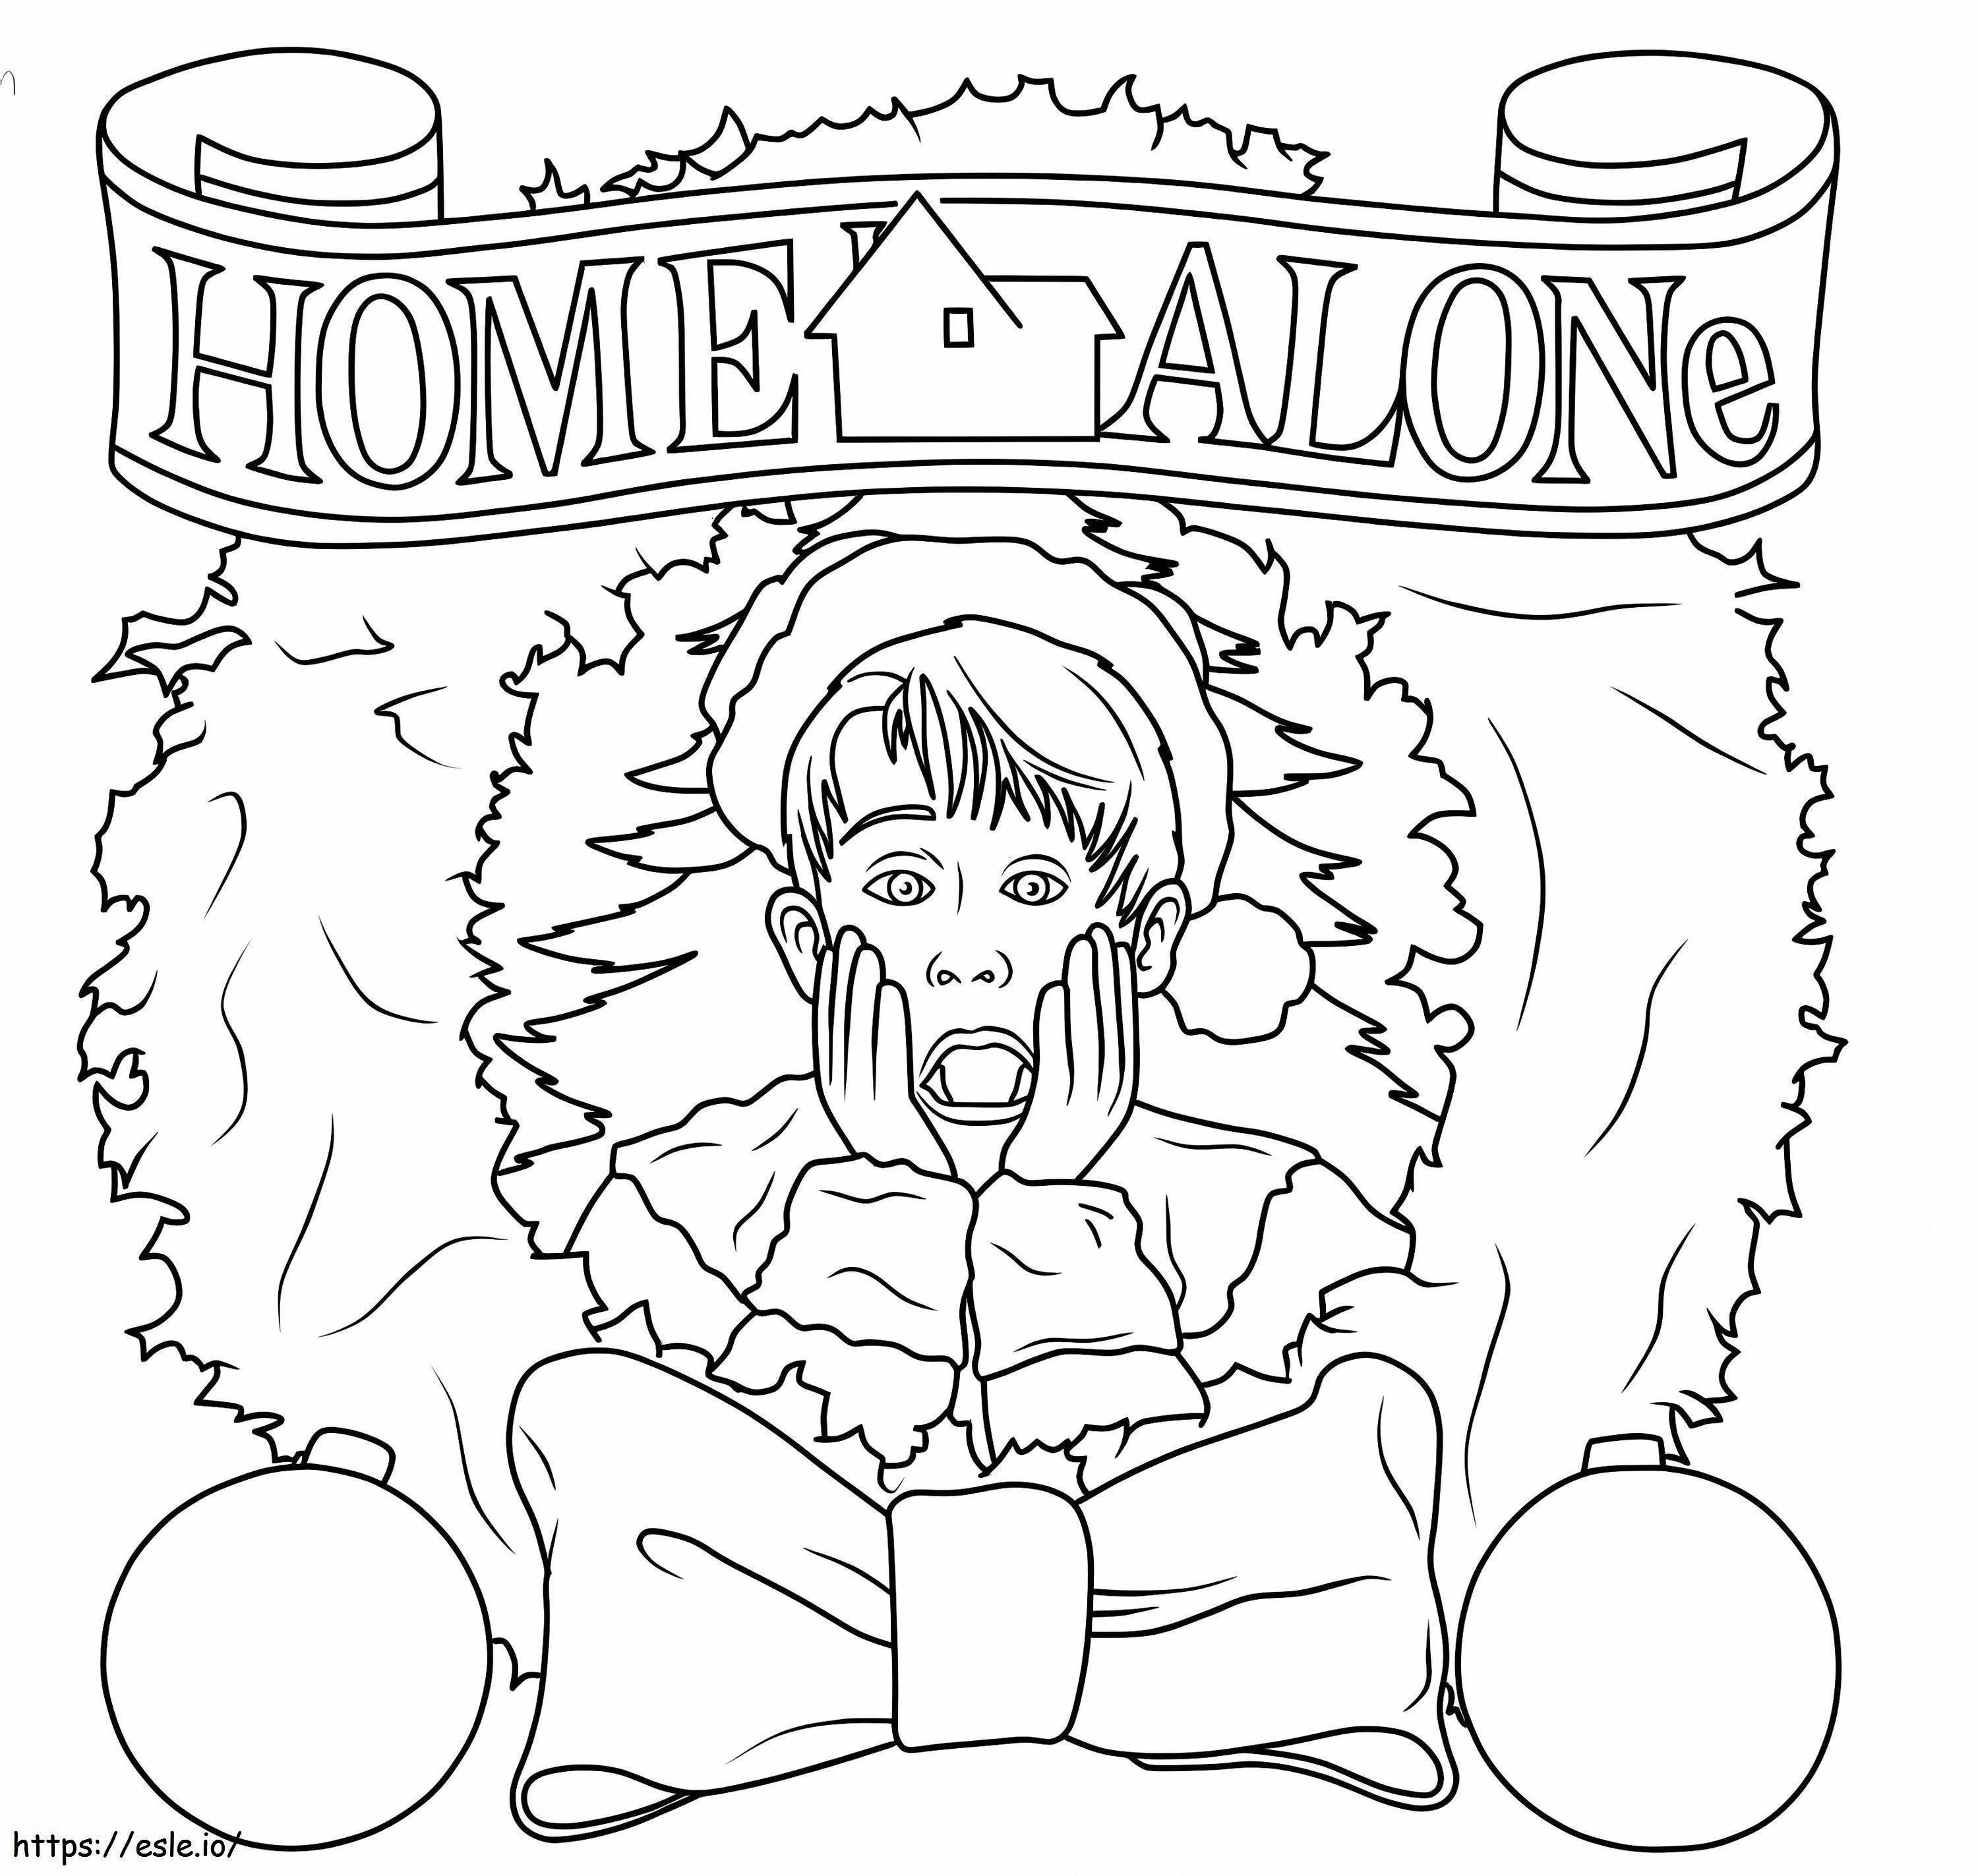 Poster Home Alone coloring page